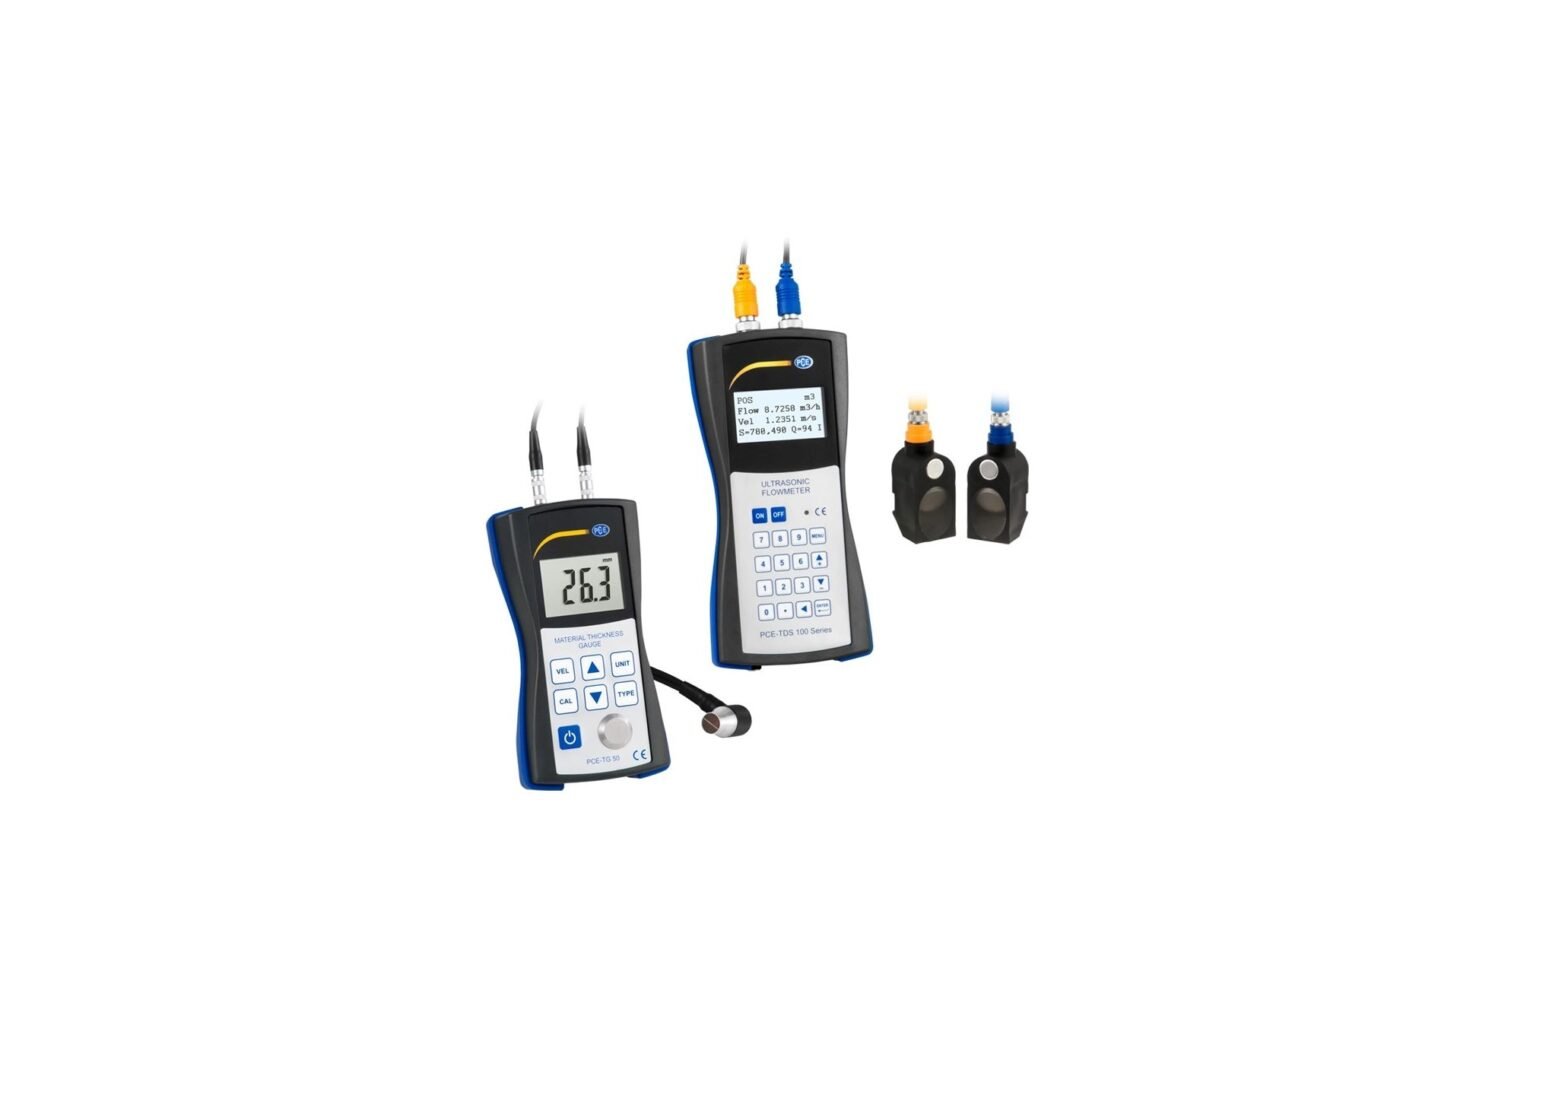 PCE-TG 50 Material Thickness Gauge User Manual - Featured image